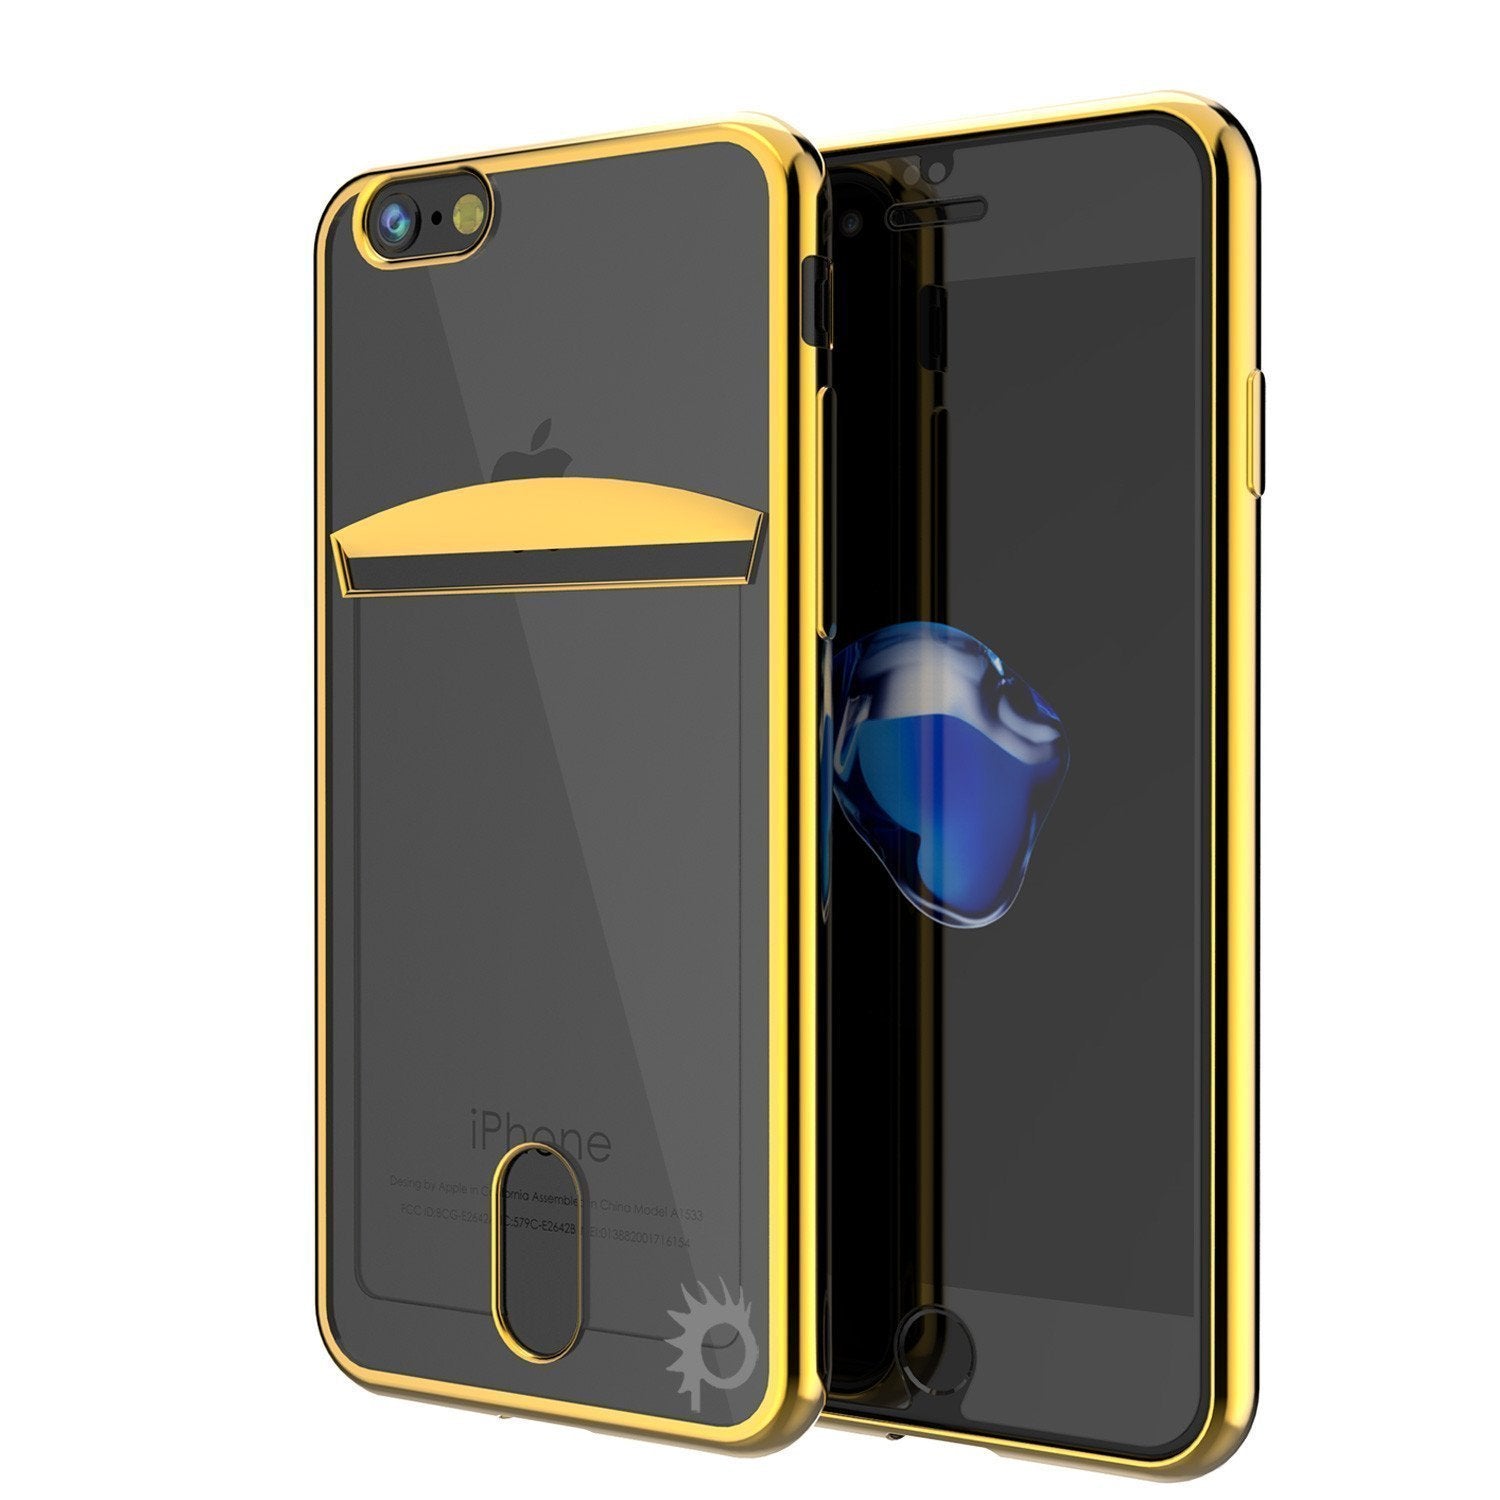 iPhone SE (4.7") Case, PUNKCASE® LUCID Gold Series | Card Slot | SHIELD Screen Protector | Ultra fit (Color in image: Gold)